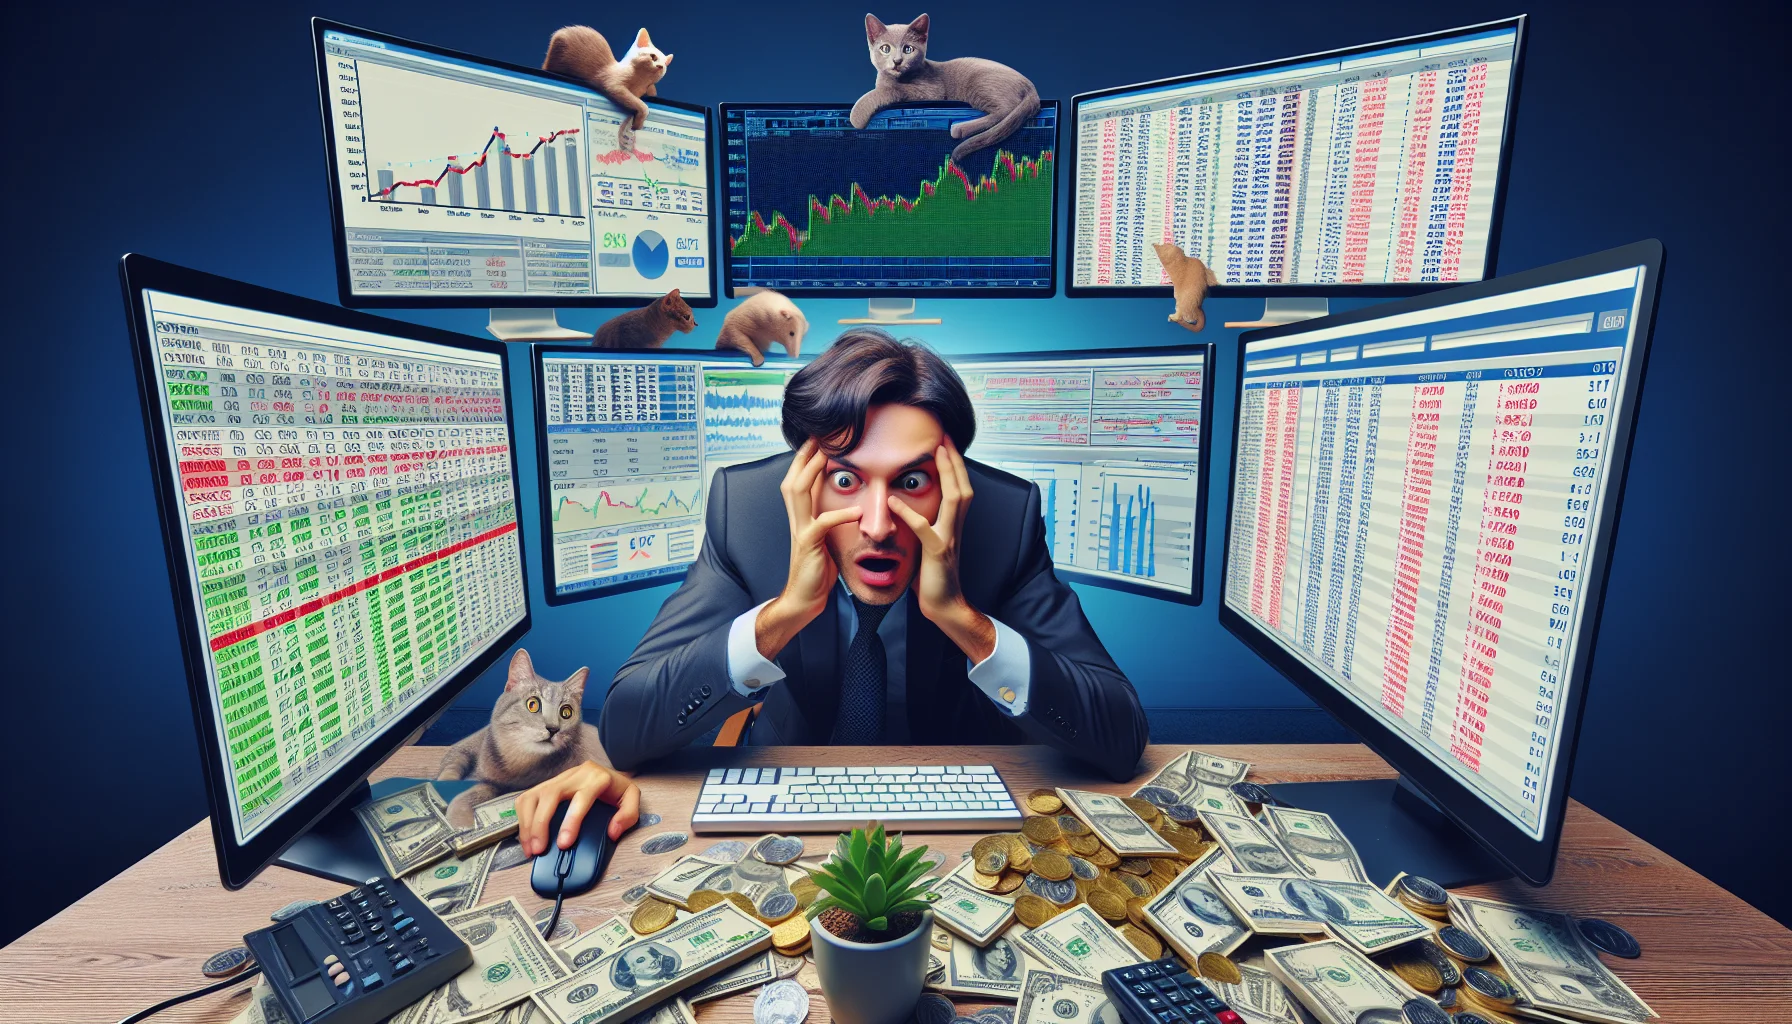 Visualize an amusing yet realistic scenario featuring an unidentified affiliate marketer who is deeply immersed in the world of online profit-making. The scene emphasizes the allure and excitement of making money on the internet. The marketer could be surrounded by multiple computer screens displaying charts, graphs, and various currencies symbols. Their face reflects a combination of determination, excitement, and a hint of stress. In the background, comedic elements like a cat playing with a computer mouse or a plant overgrowing from lack of attention.